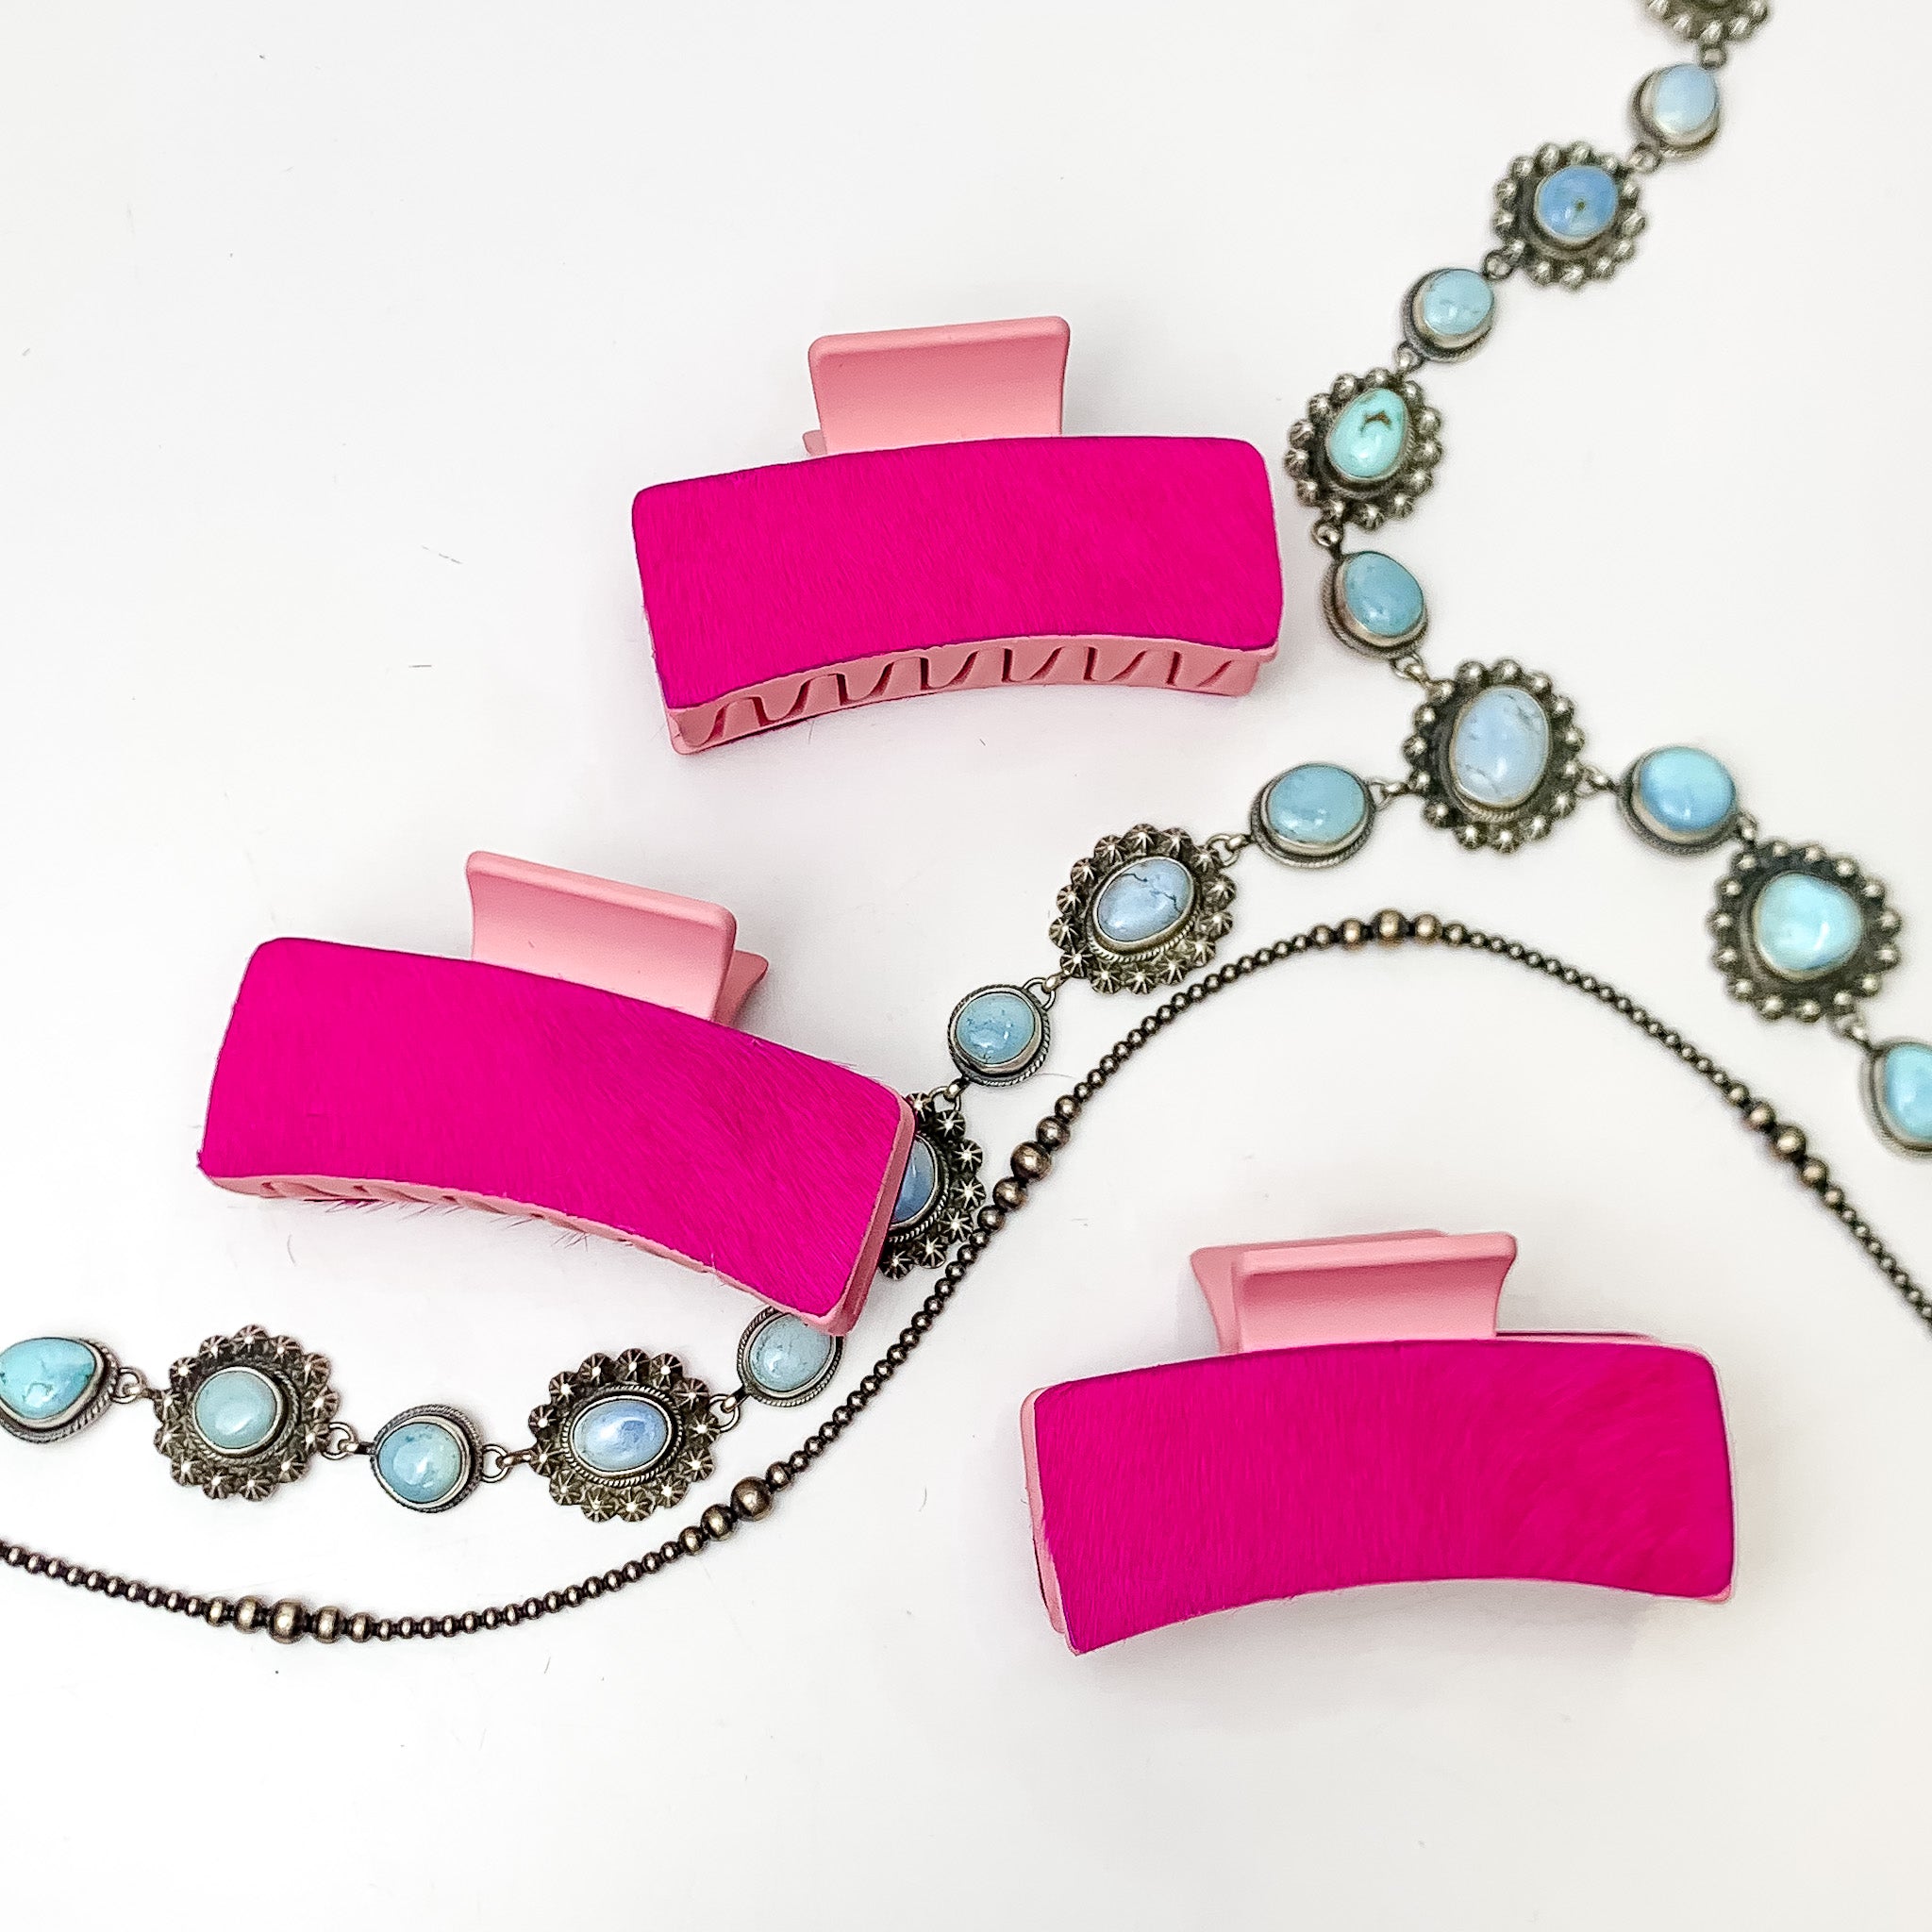 Pictured are three pink hair clips with hot pink hide patches. These earrings are pictured on a white background with silver necklaces under the clips. 